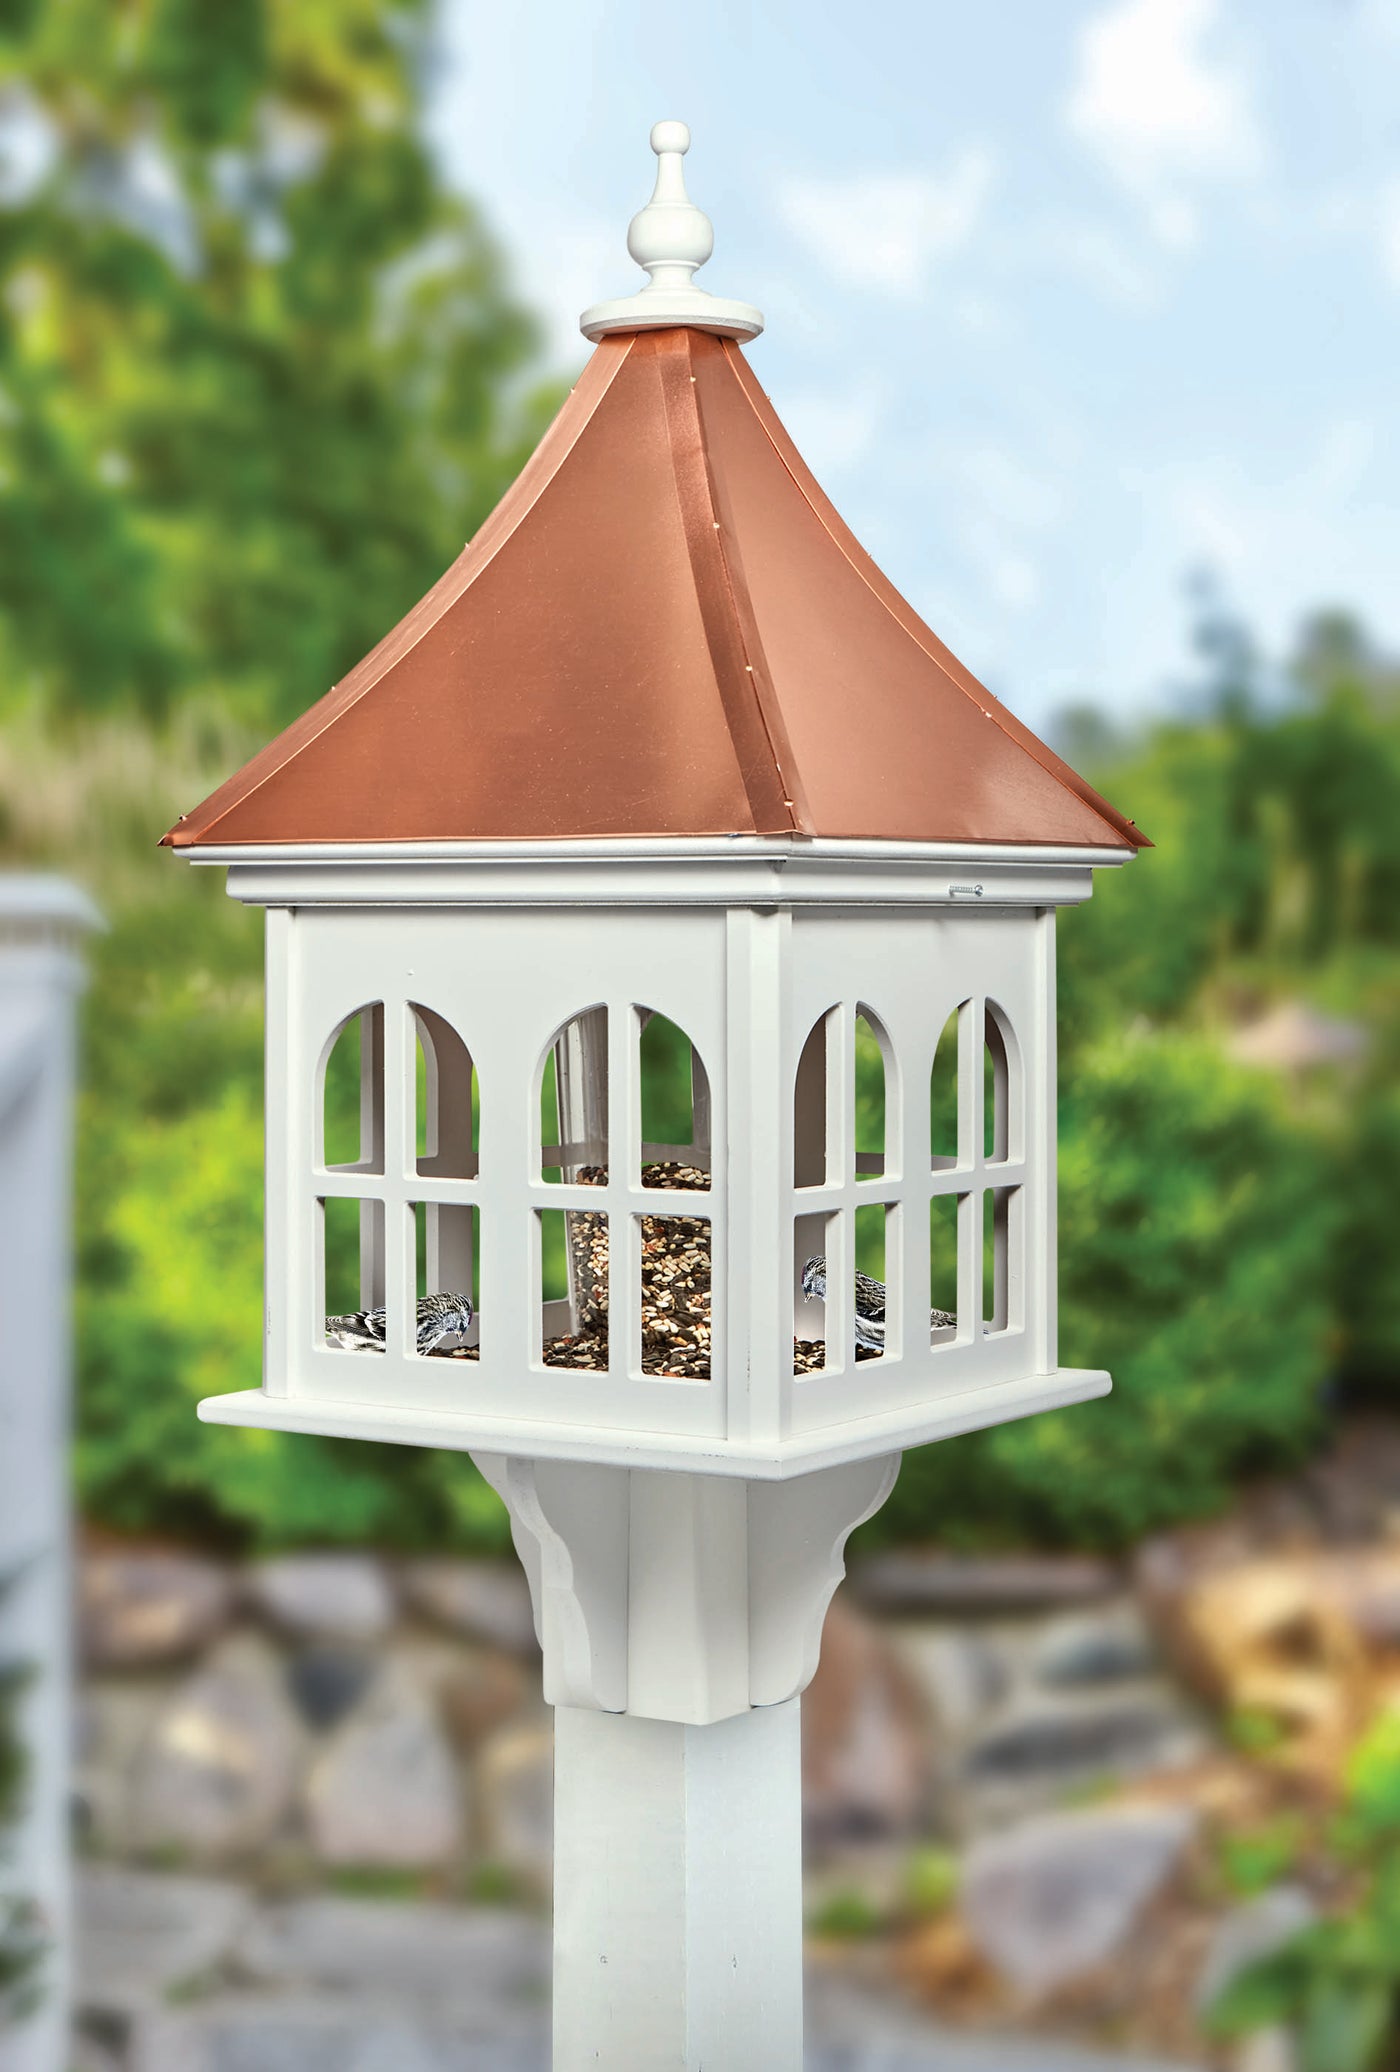 Bird Feeder with Arched Windows and Copper Roof